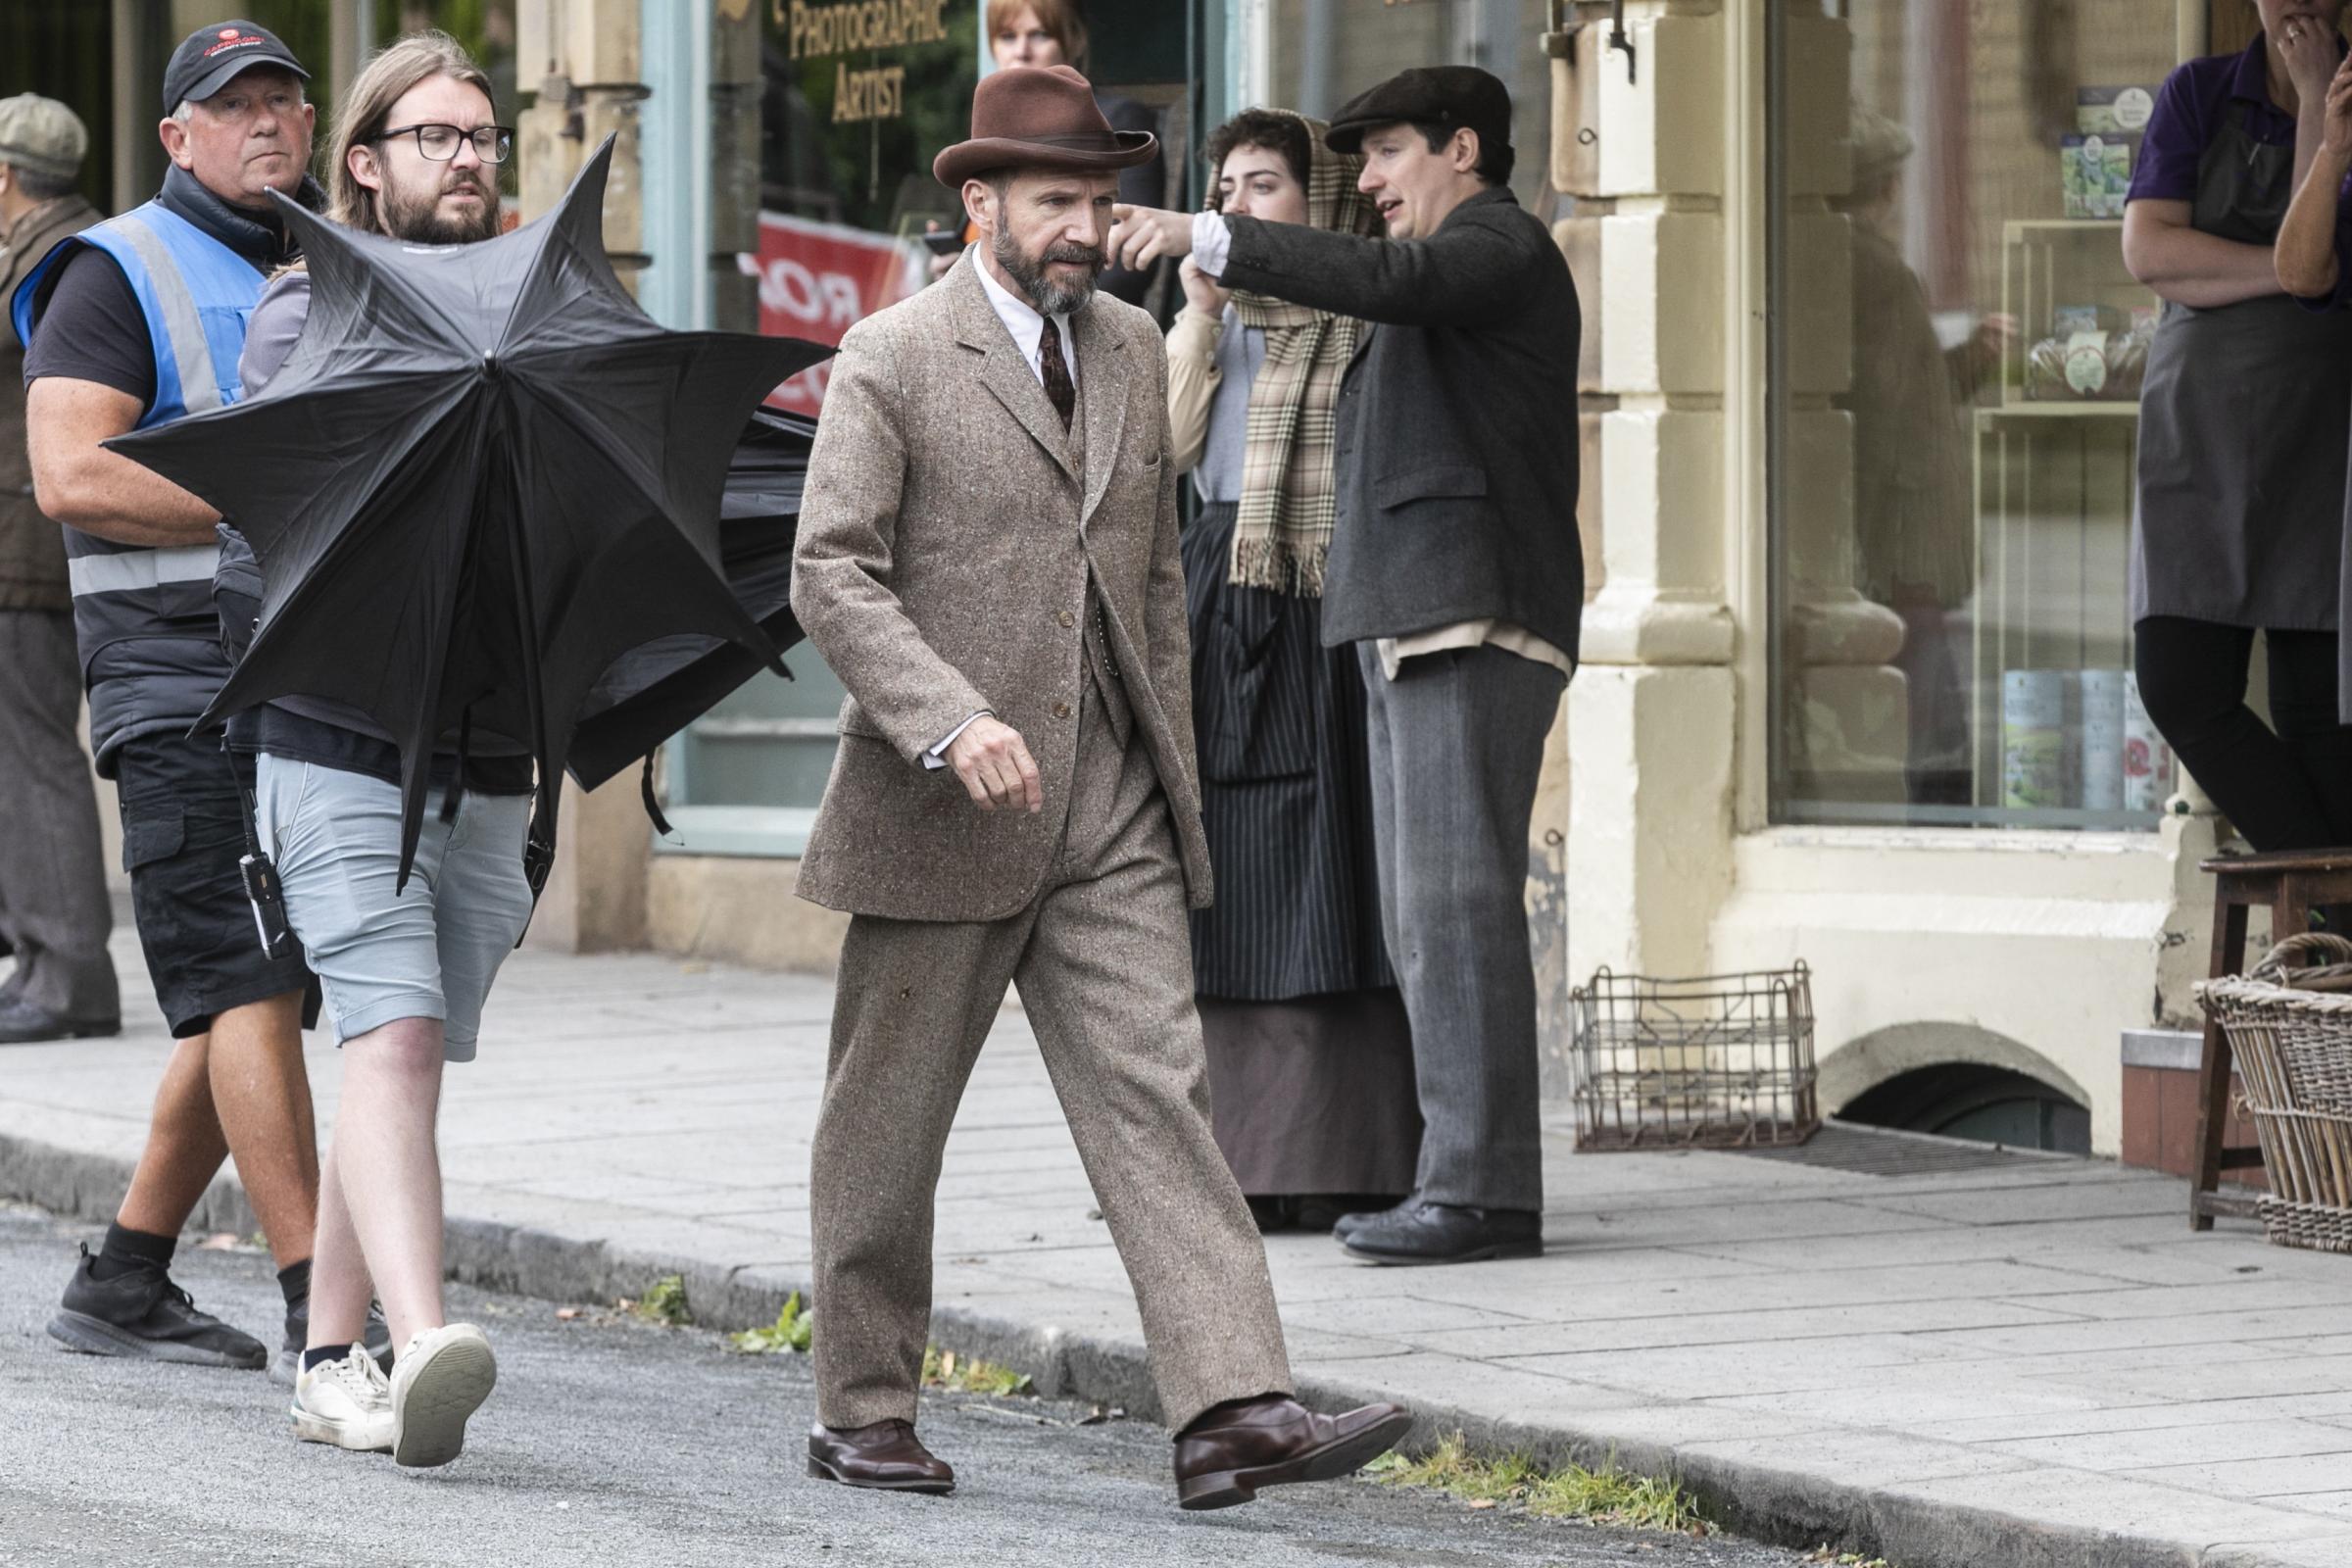 Harry Potter star Ralph Fiennes spotted in Saltaire filming BBC production